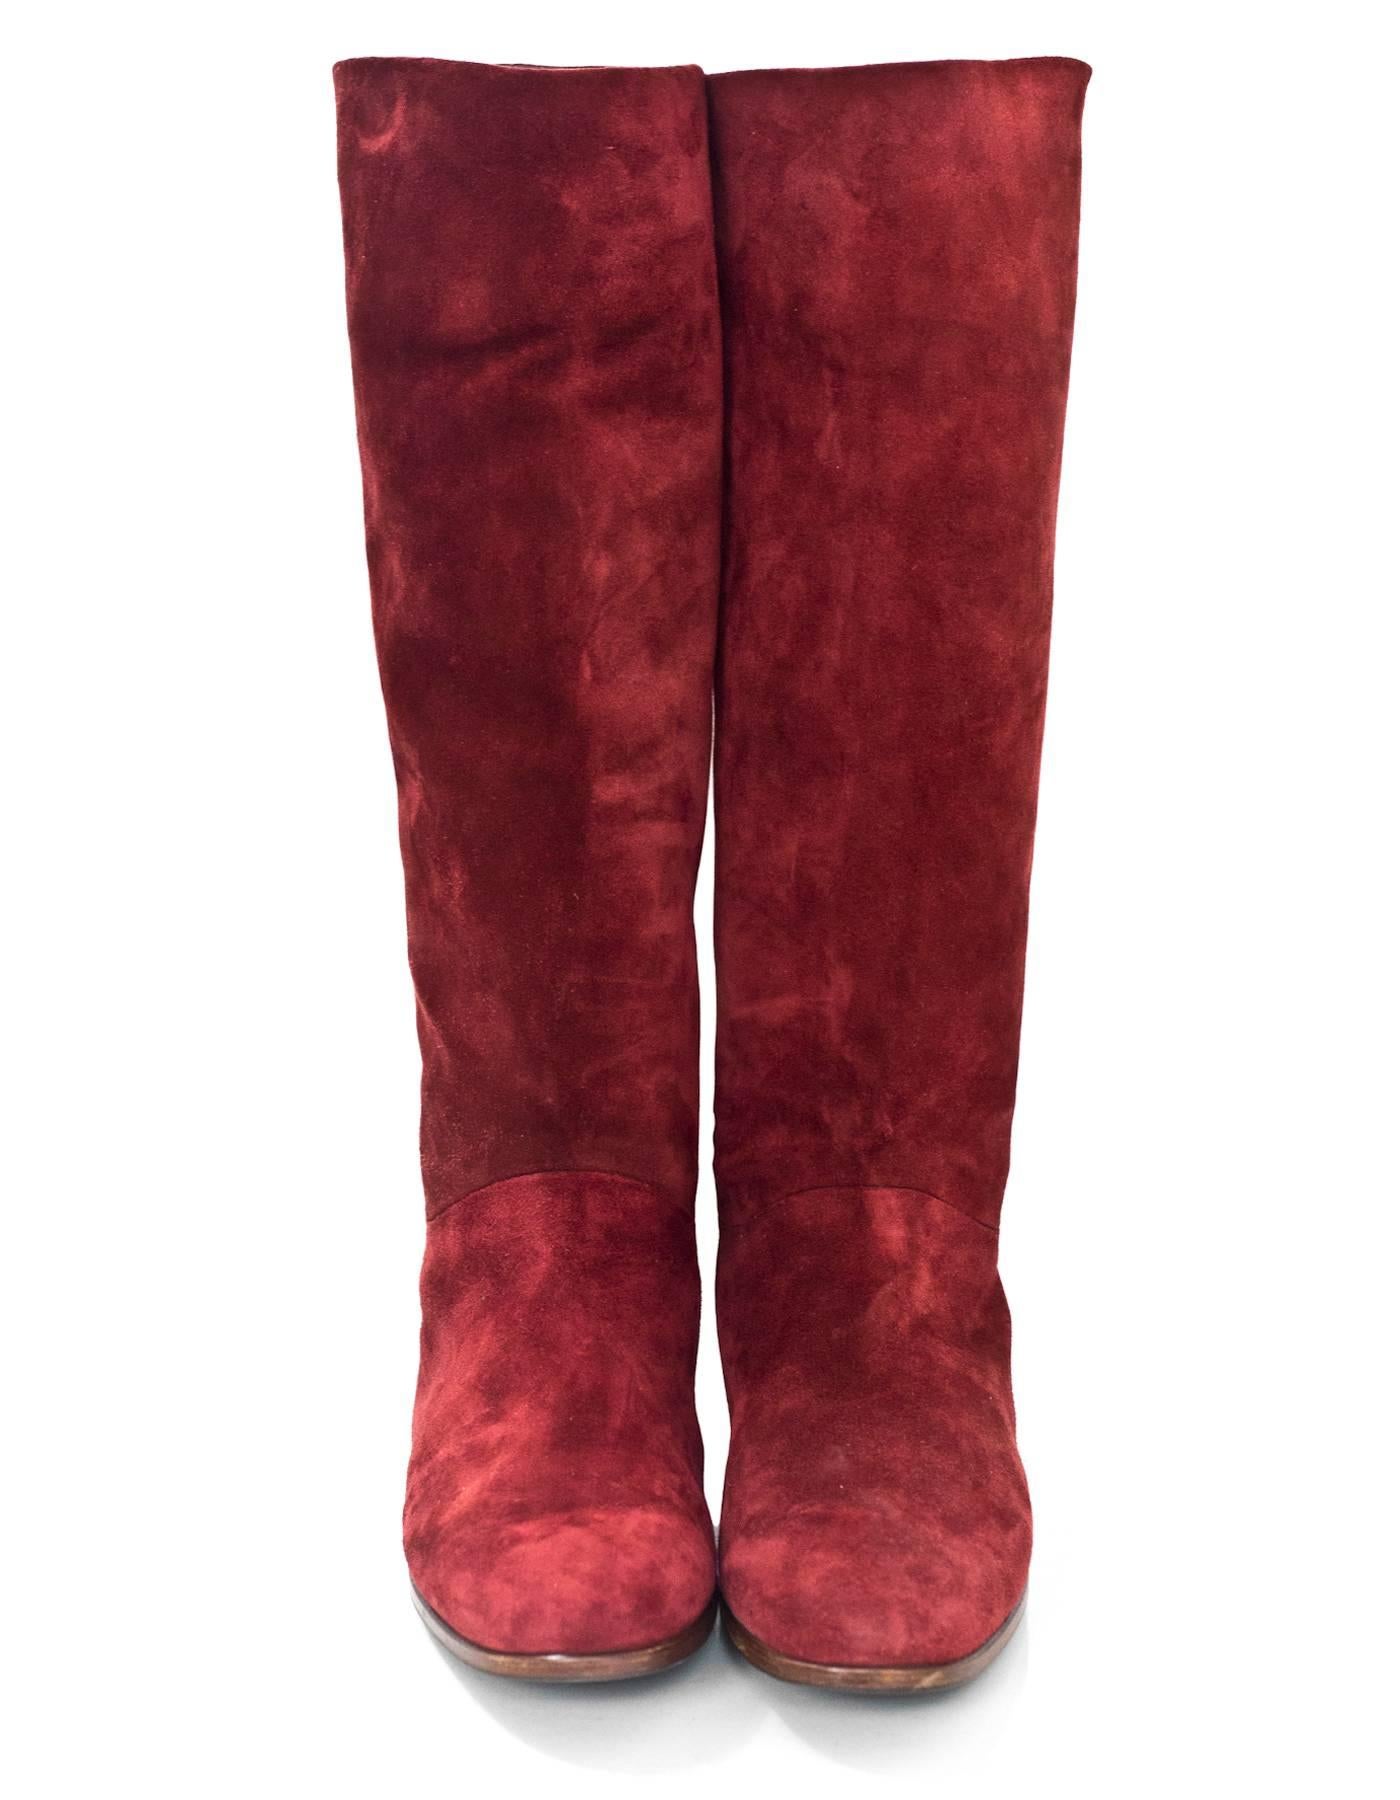 Brown Gucci Burgundy Suede Boots Sz 40